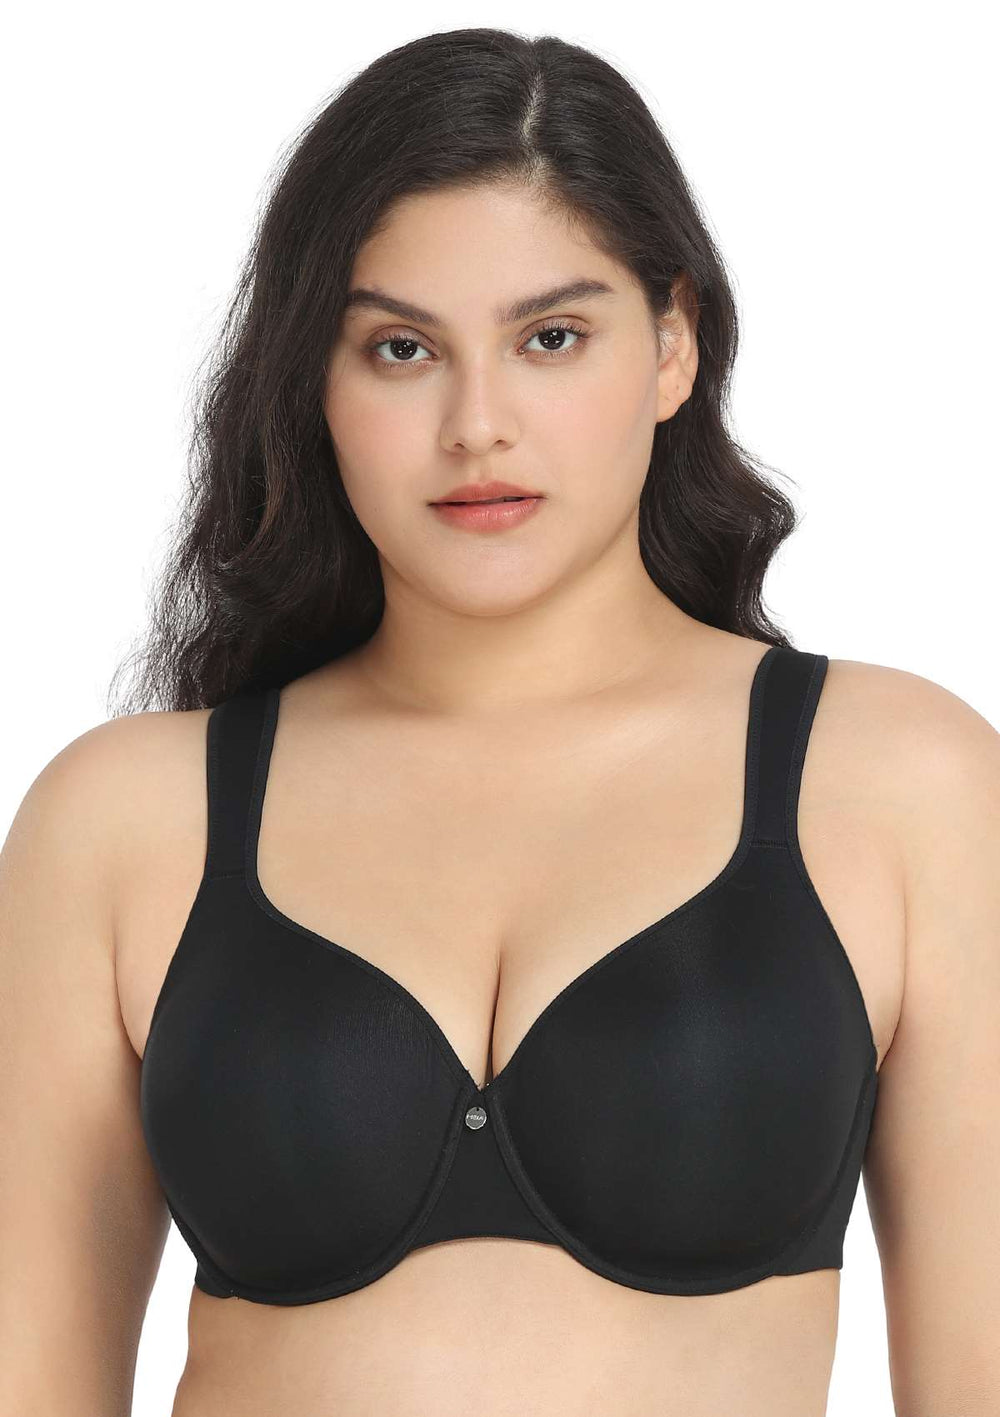 Cacique Black Bra Womens 46C Lightly Lined T-Shirt Molded Cup Underwire